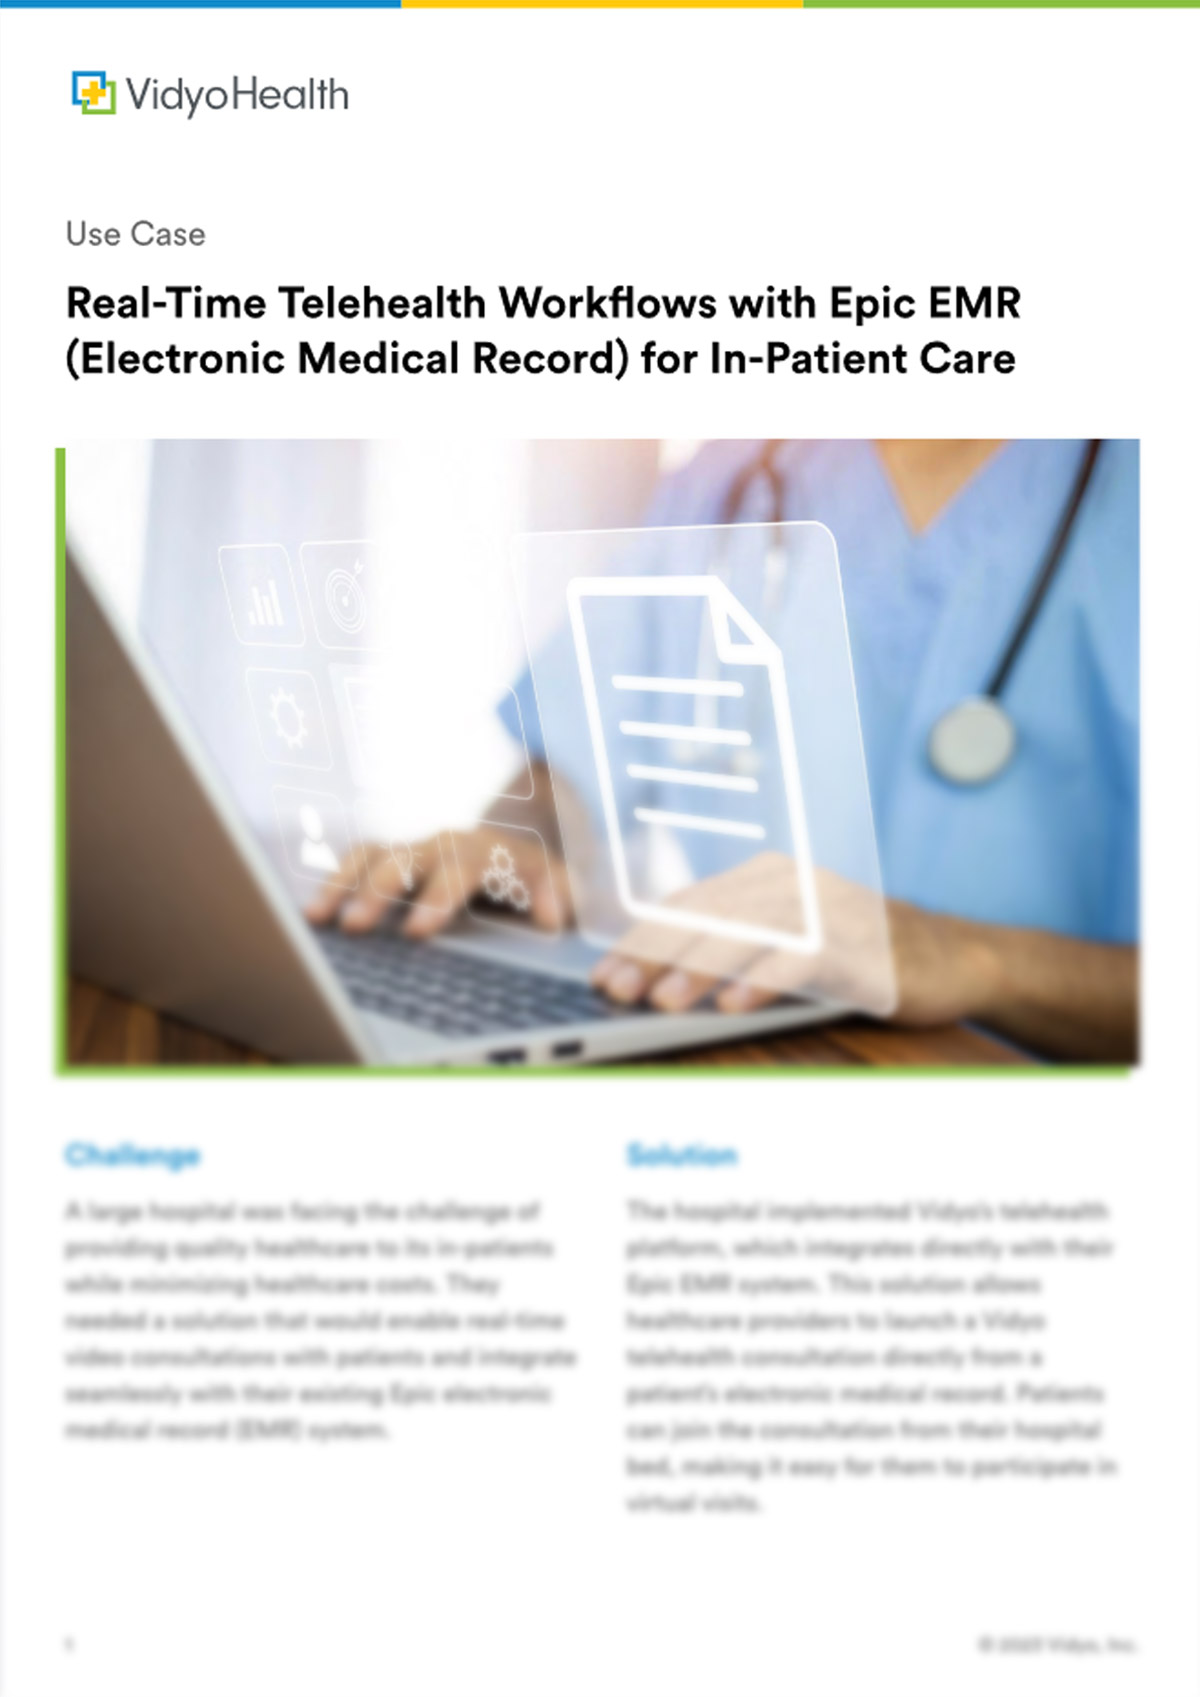 vidyohealth-res-page-Use-Case-Real-Time-Telehealth-Workflows-with-Epic-EMR-for-In-Patient-Care